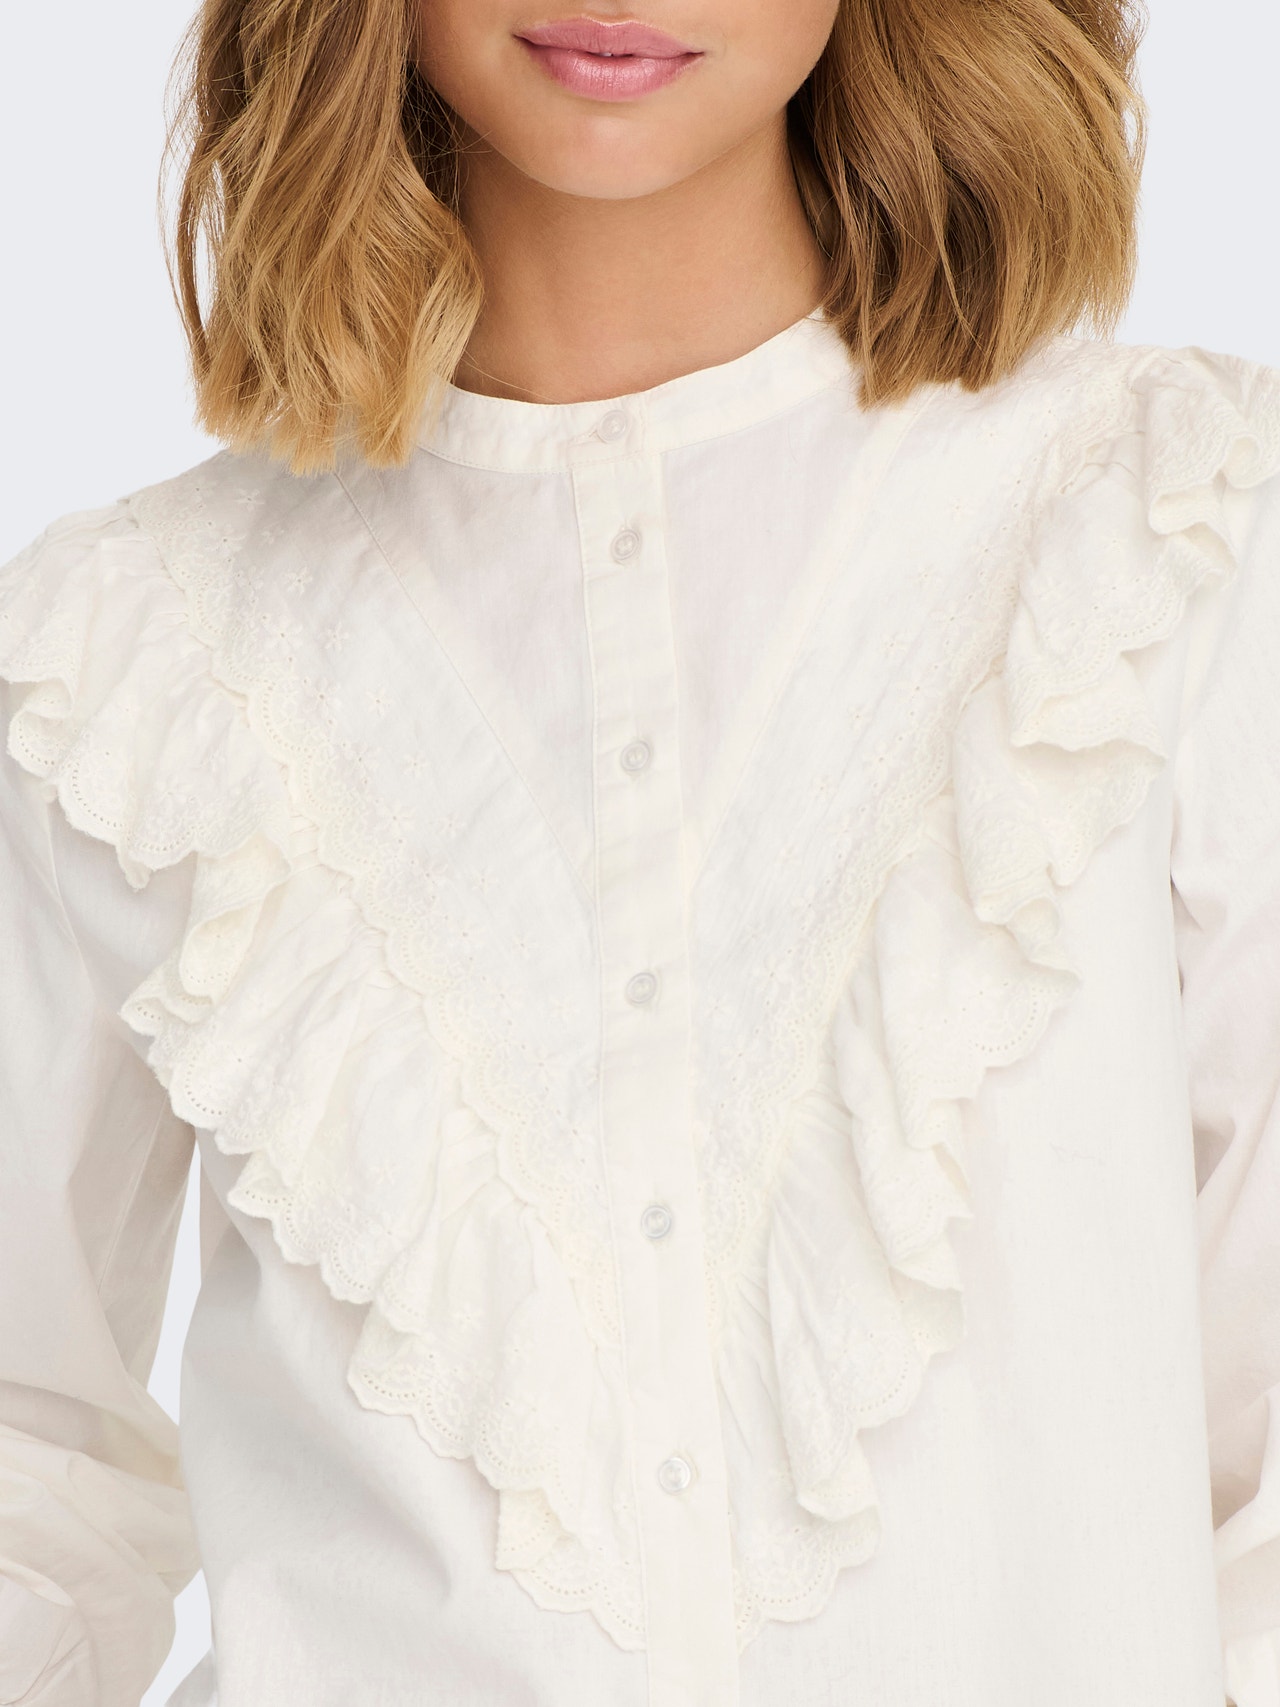 ONLY shirt with lace detail -Cloud Dancer - 15281526